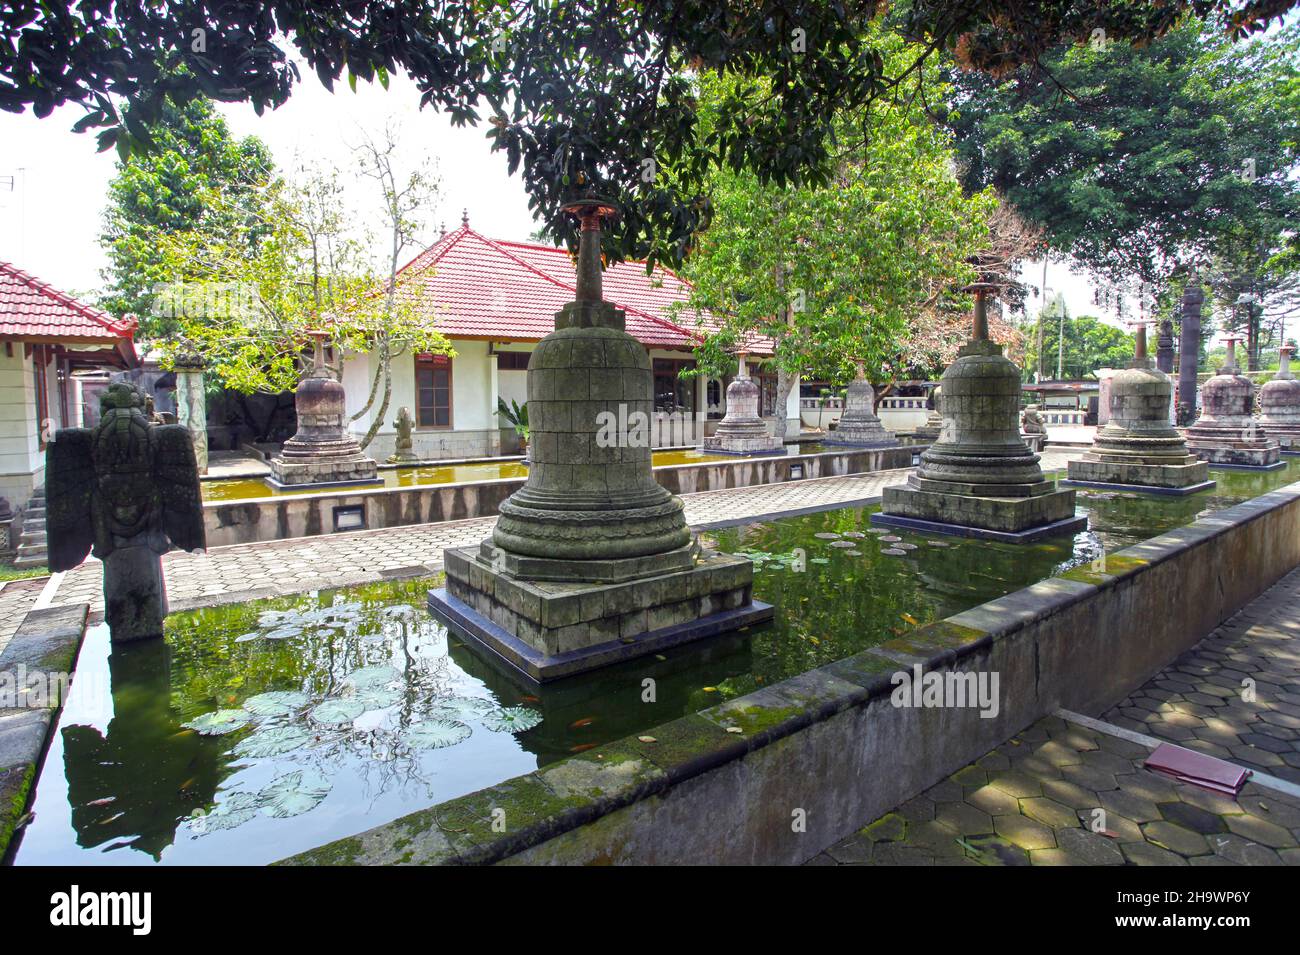 The Mendut Buddhist Monastery located beside the ancient 9th Century AD Mendut Temple in Central Java, Indonesia. Stock Photo